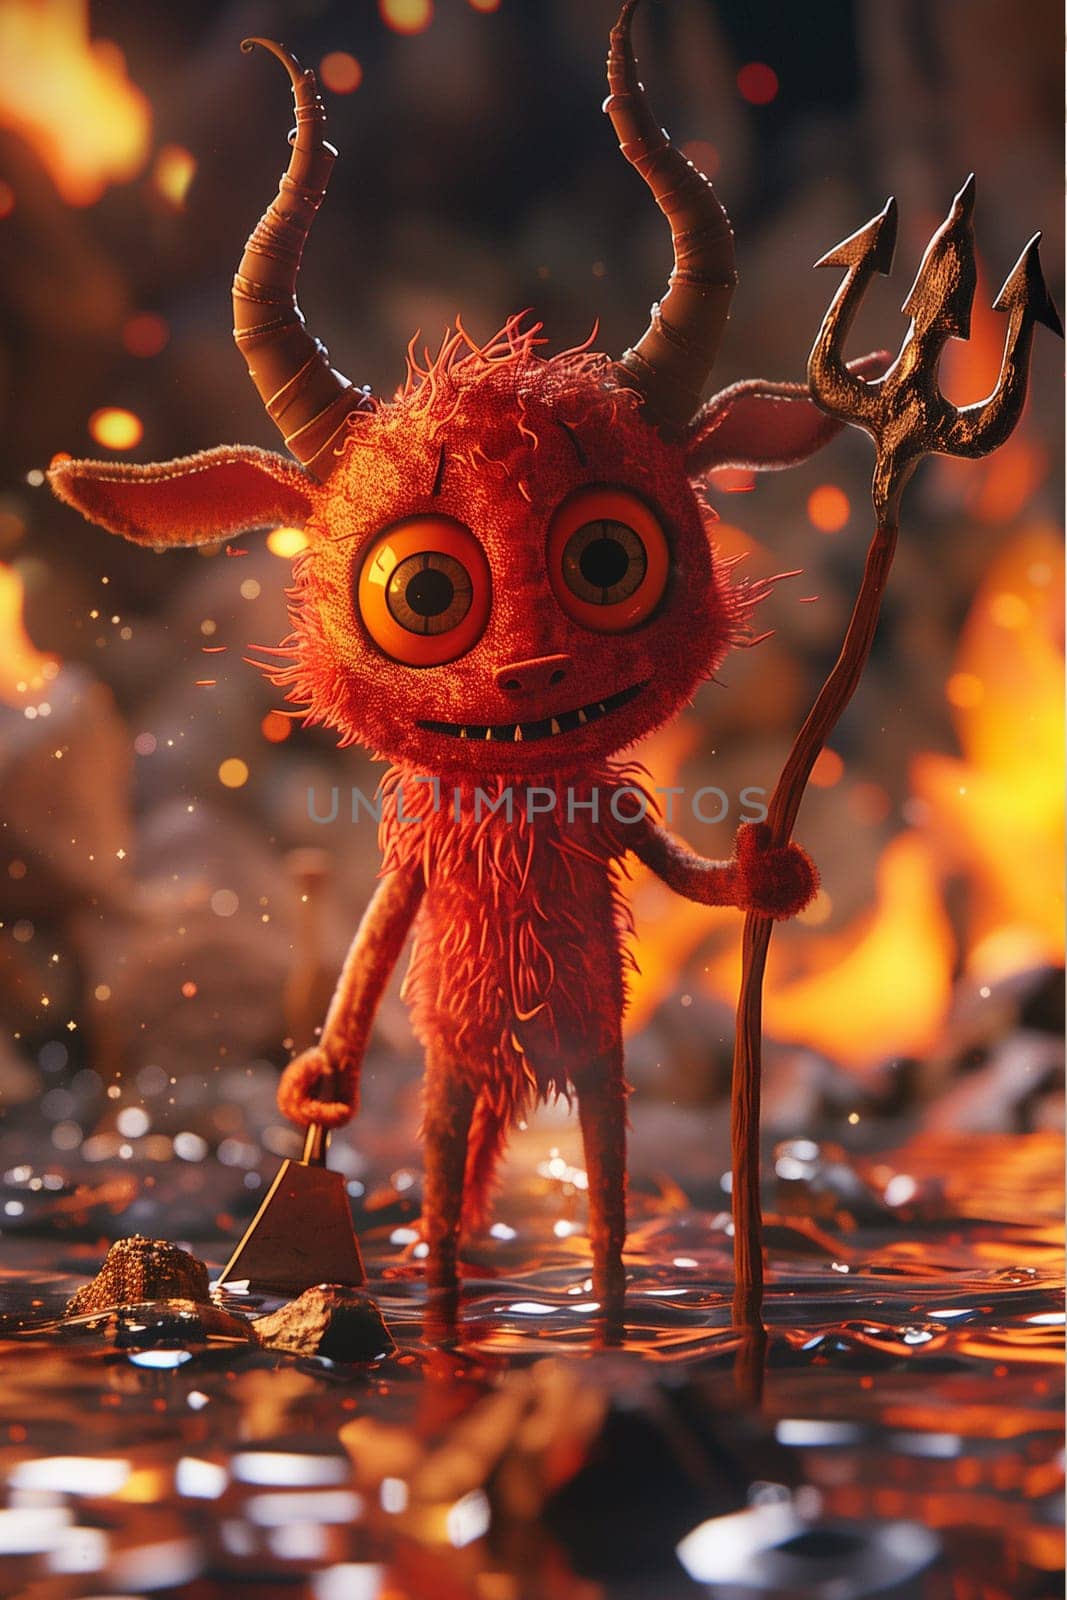 Cartoon Character With Big Eyes Holding a Stick by Sd28DimoN_1976